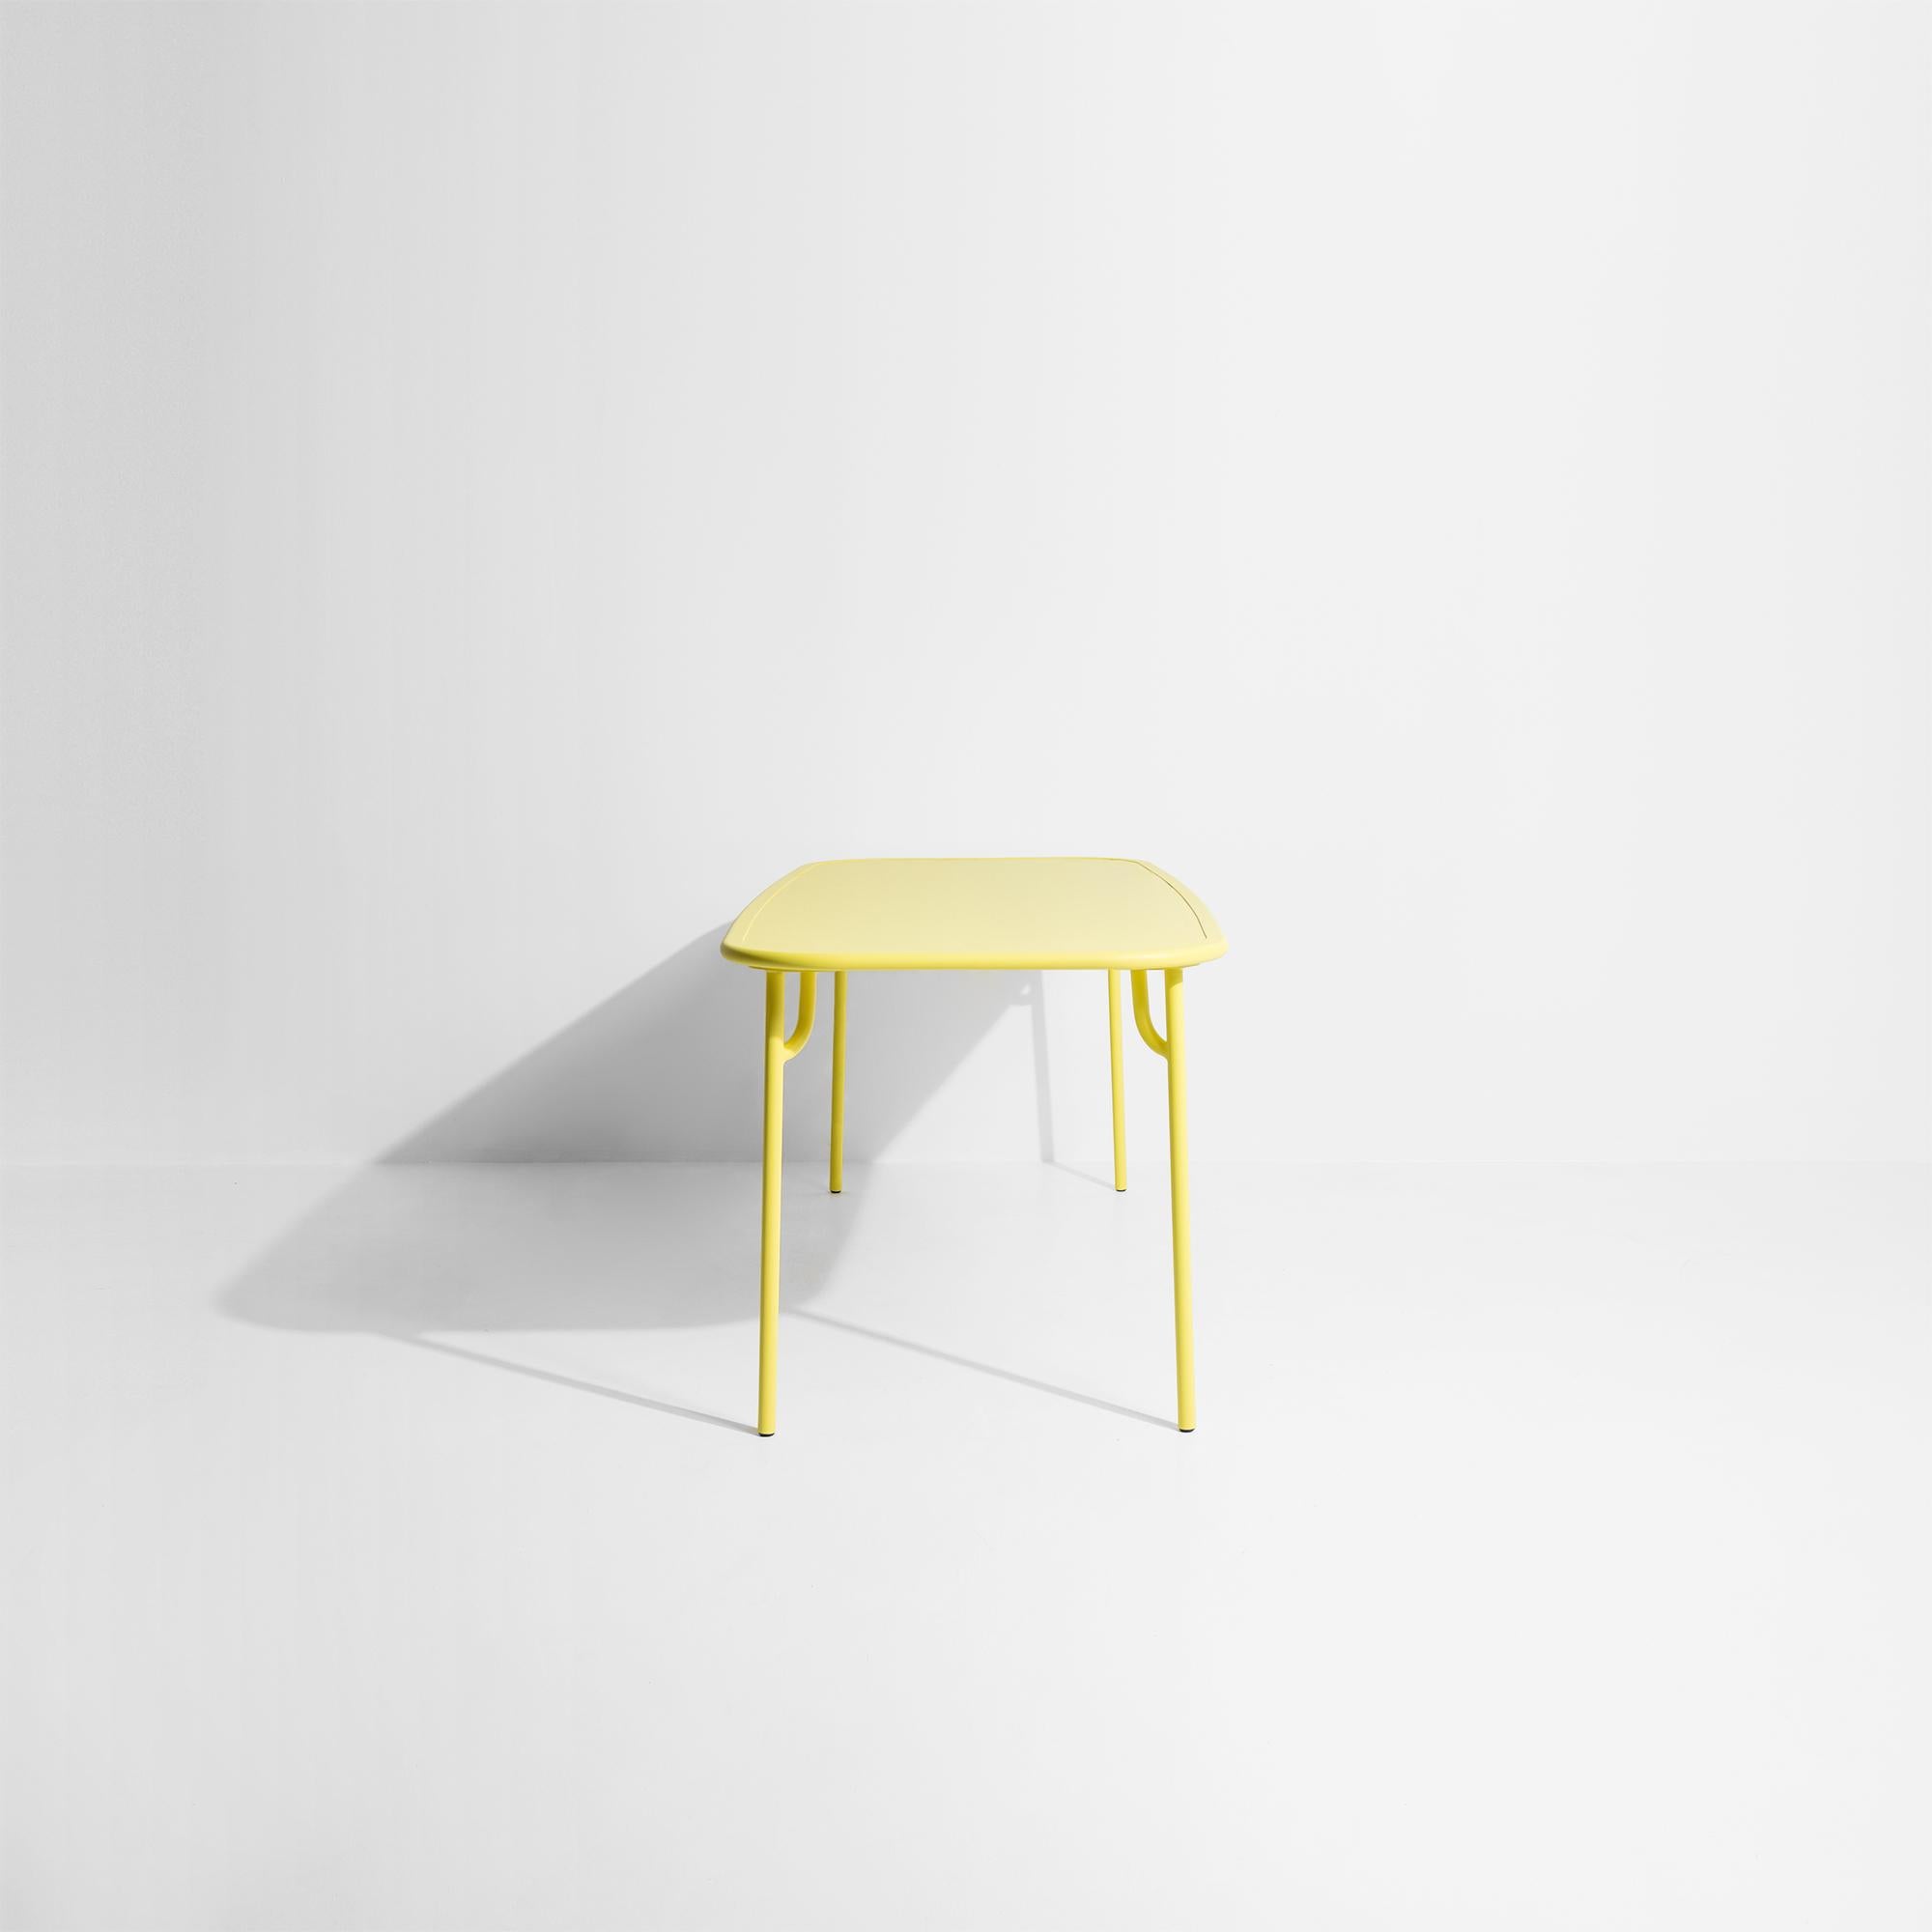 Petite Friture Week-End Medium Plain Rectangular Dining Table in Yellow, 2017 For Sale 1